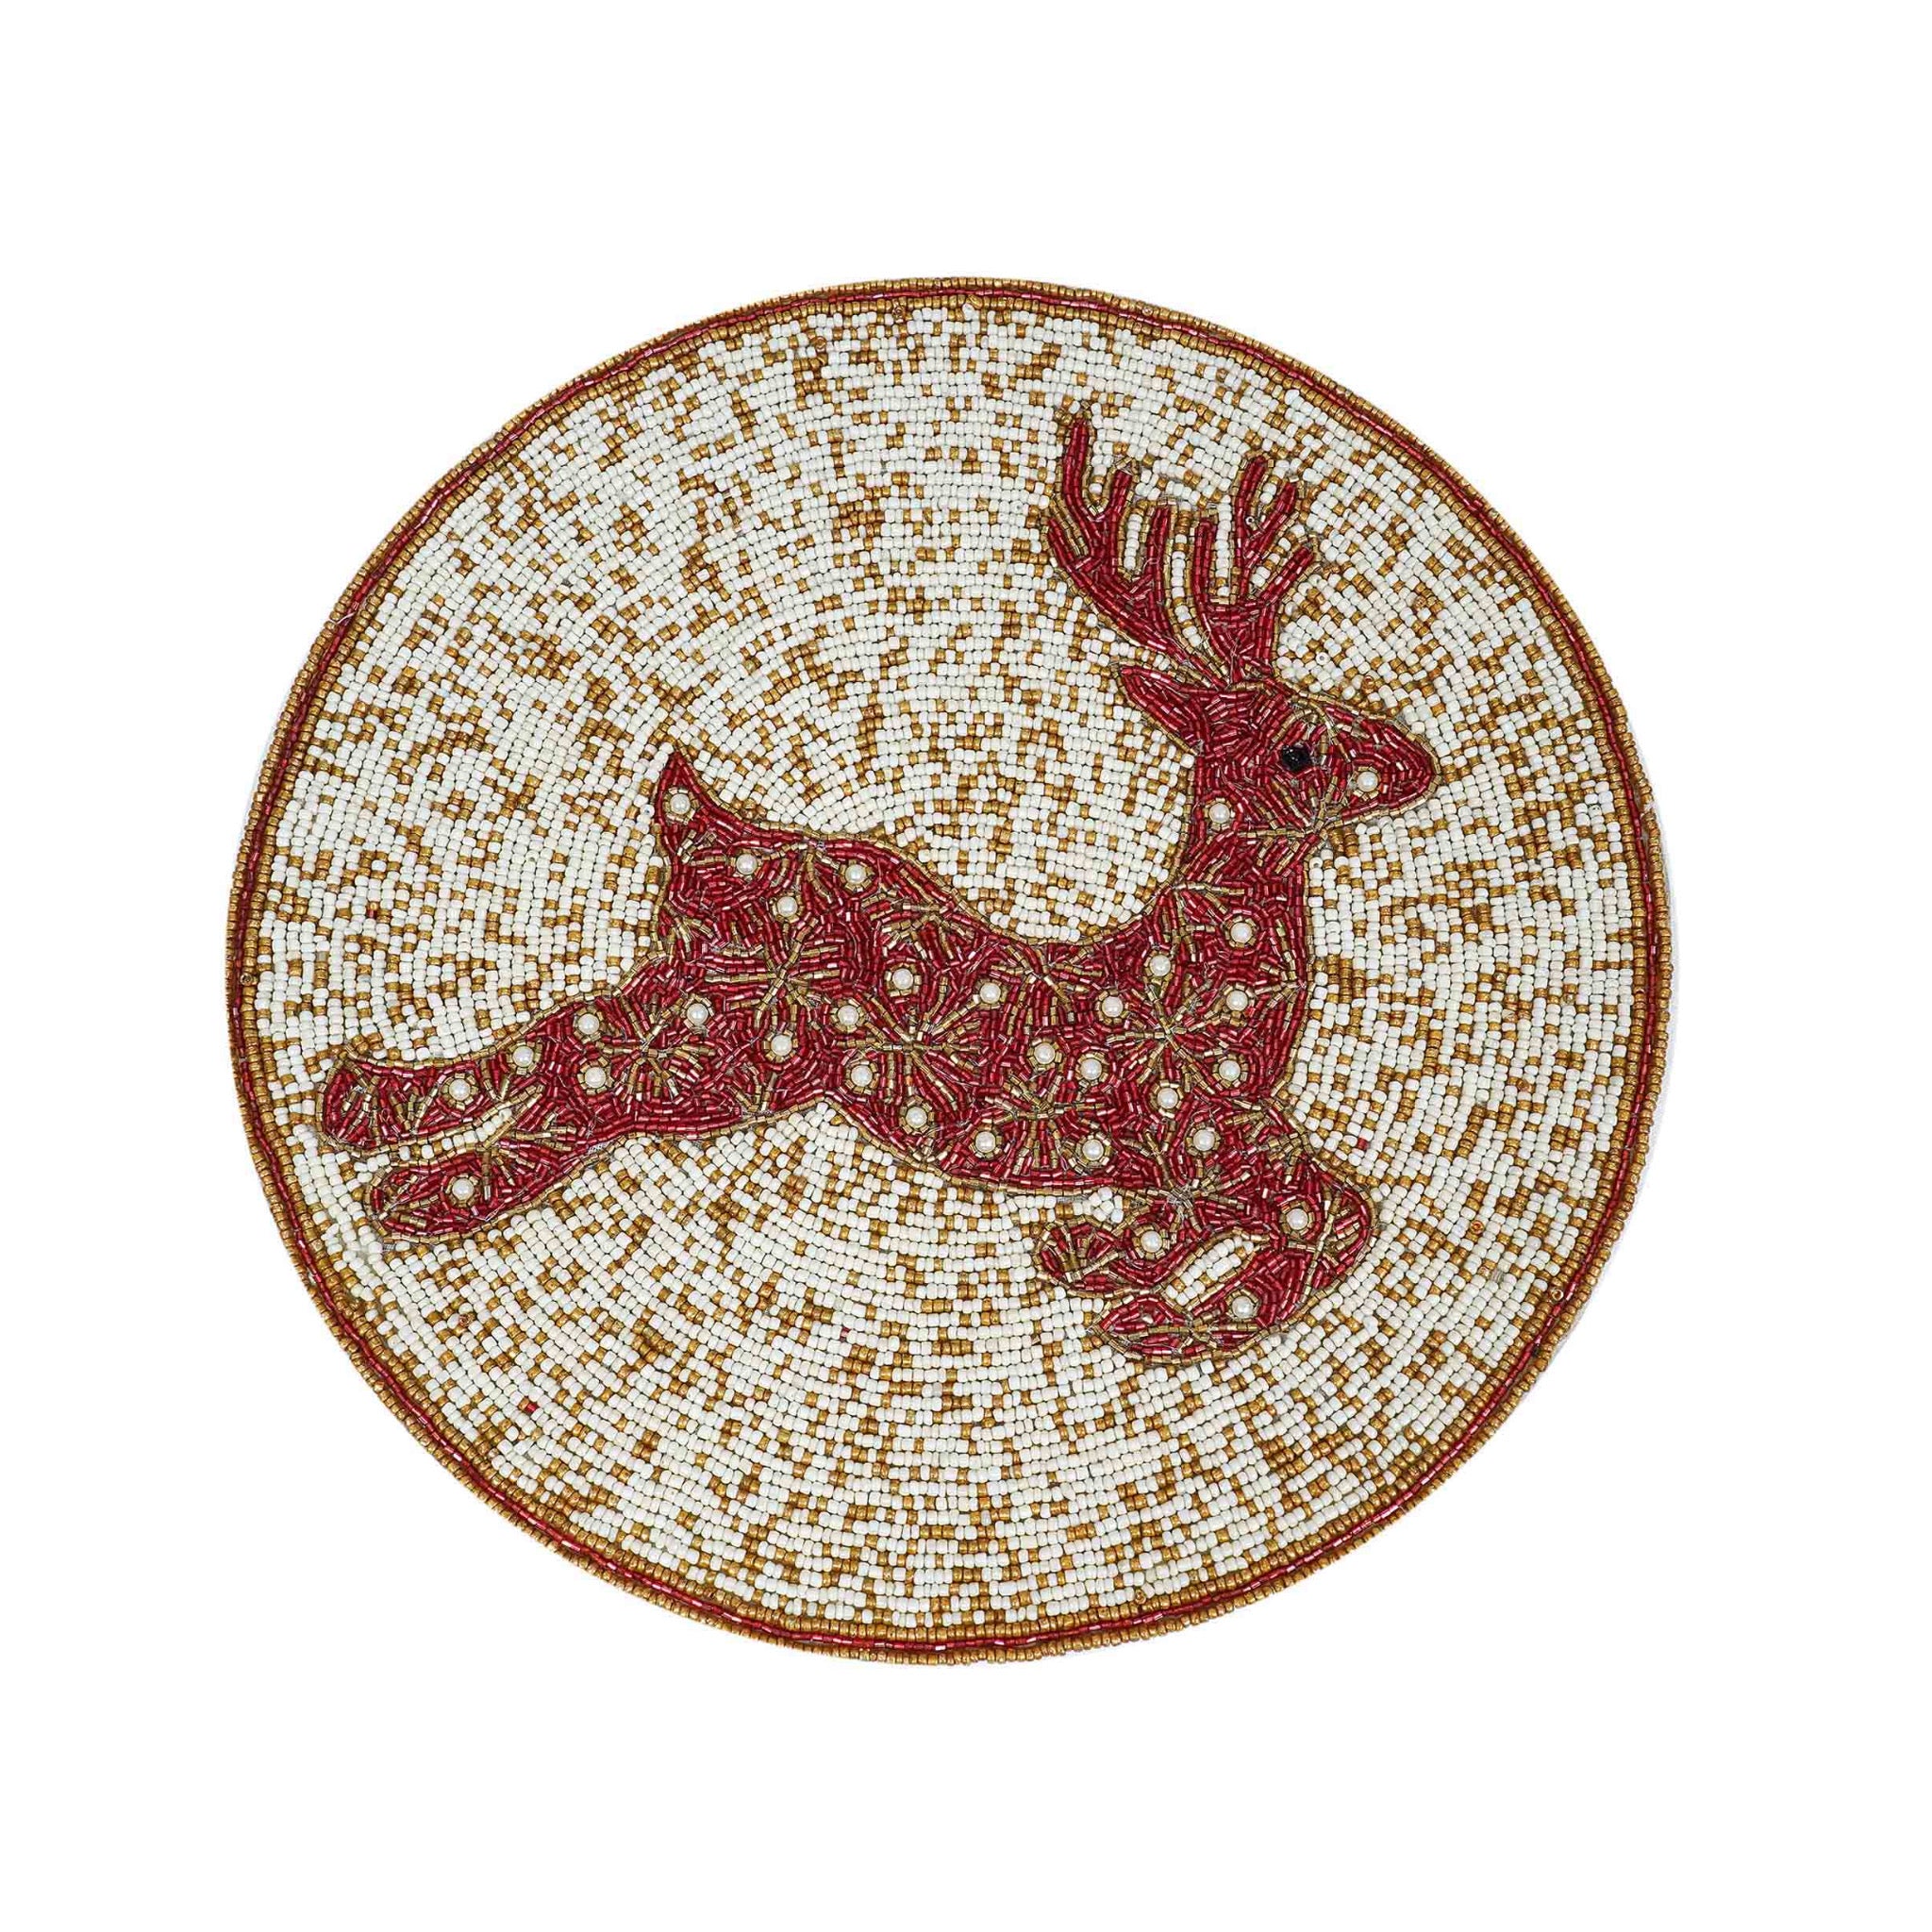 Be A Deer Bead Embroidered Placemat in Cream & Red, Set of 2/4